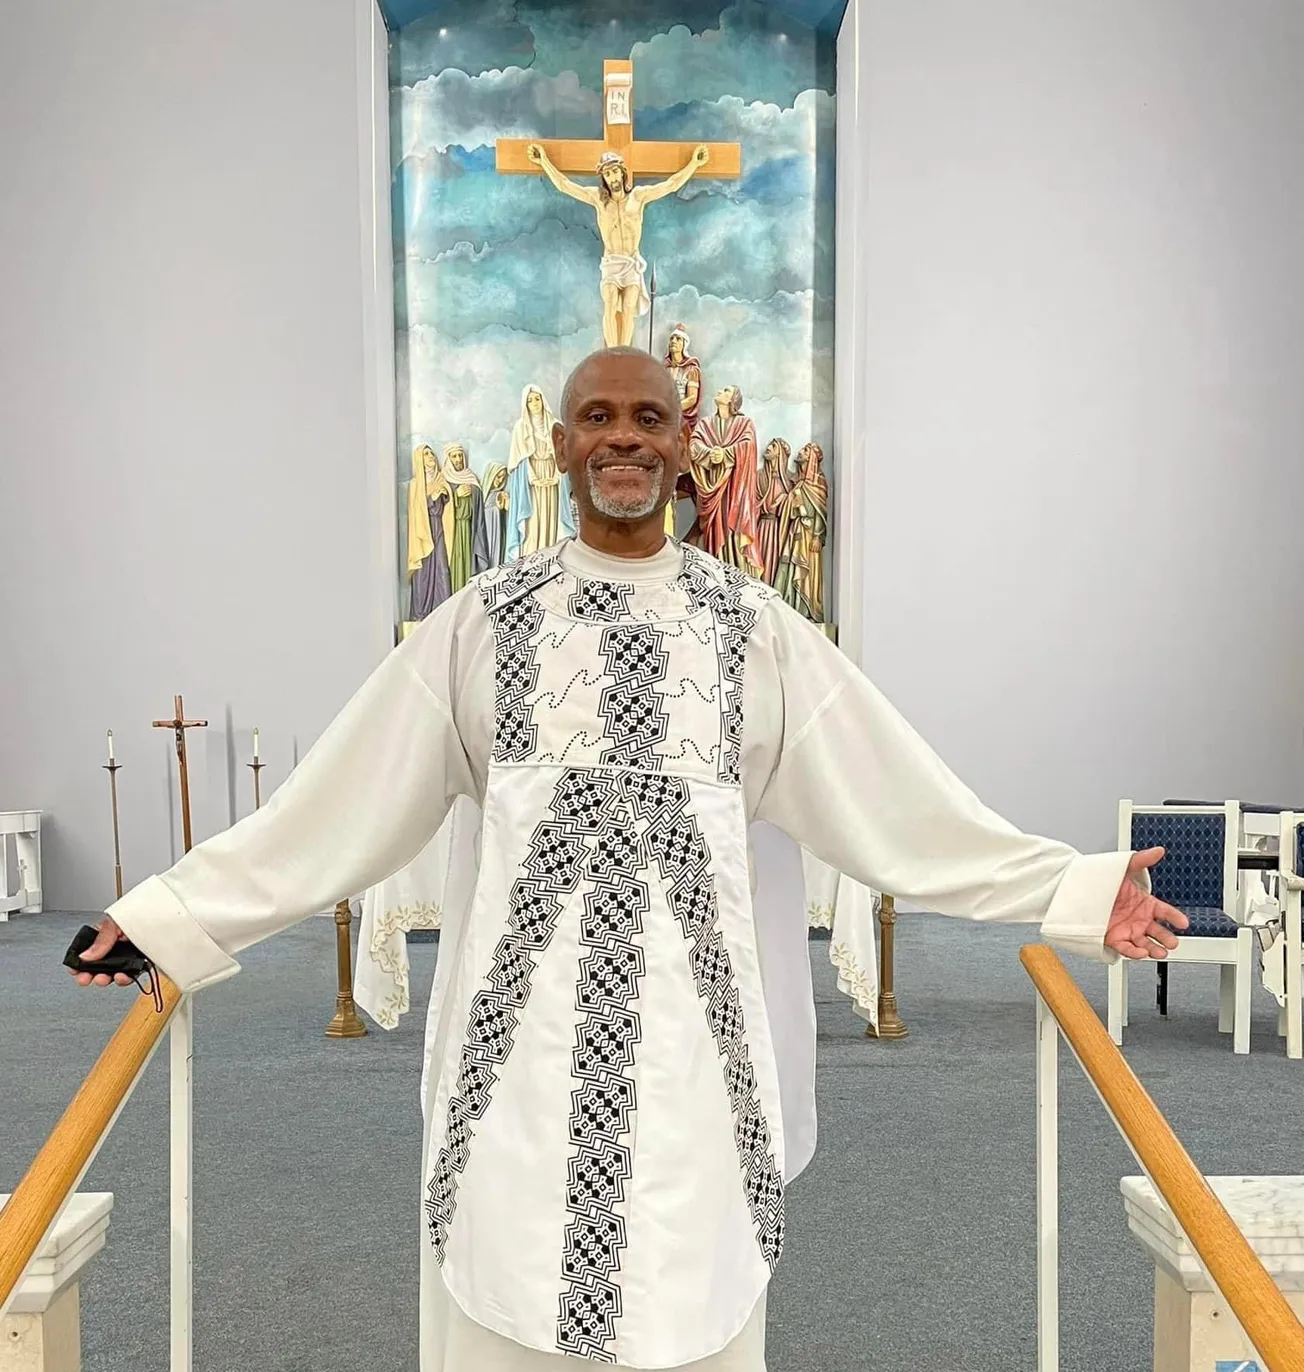 Fr Everett Pearson, DC African-American priest educated in Rome, dead at 61